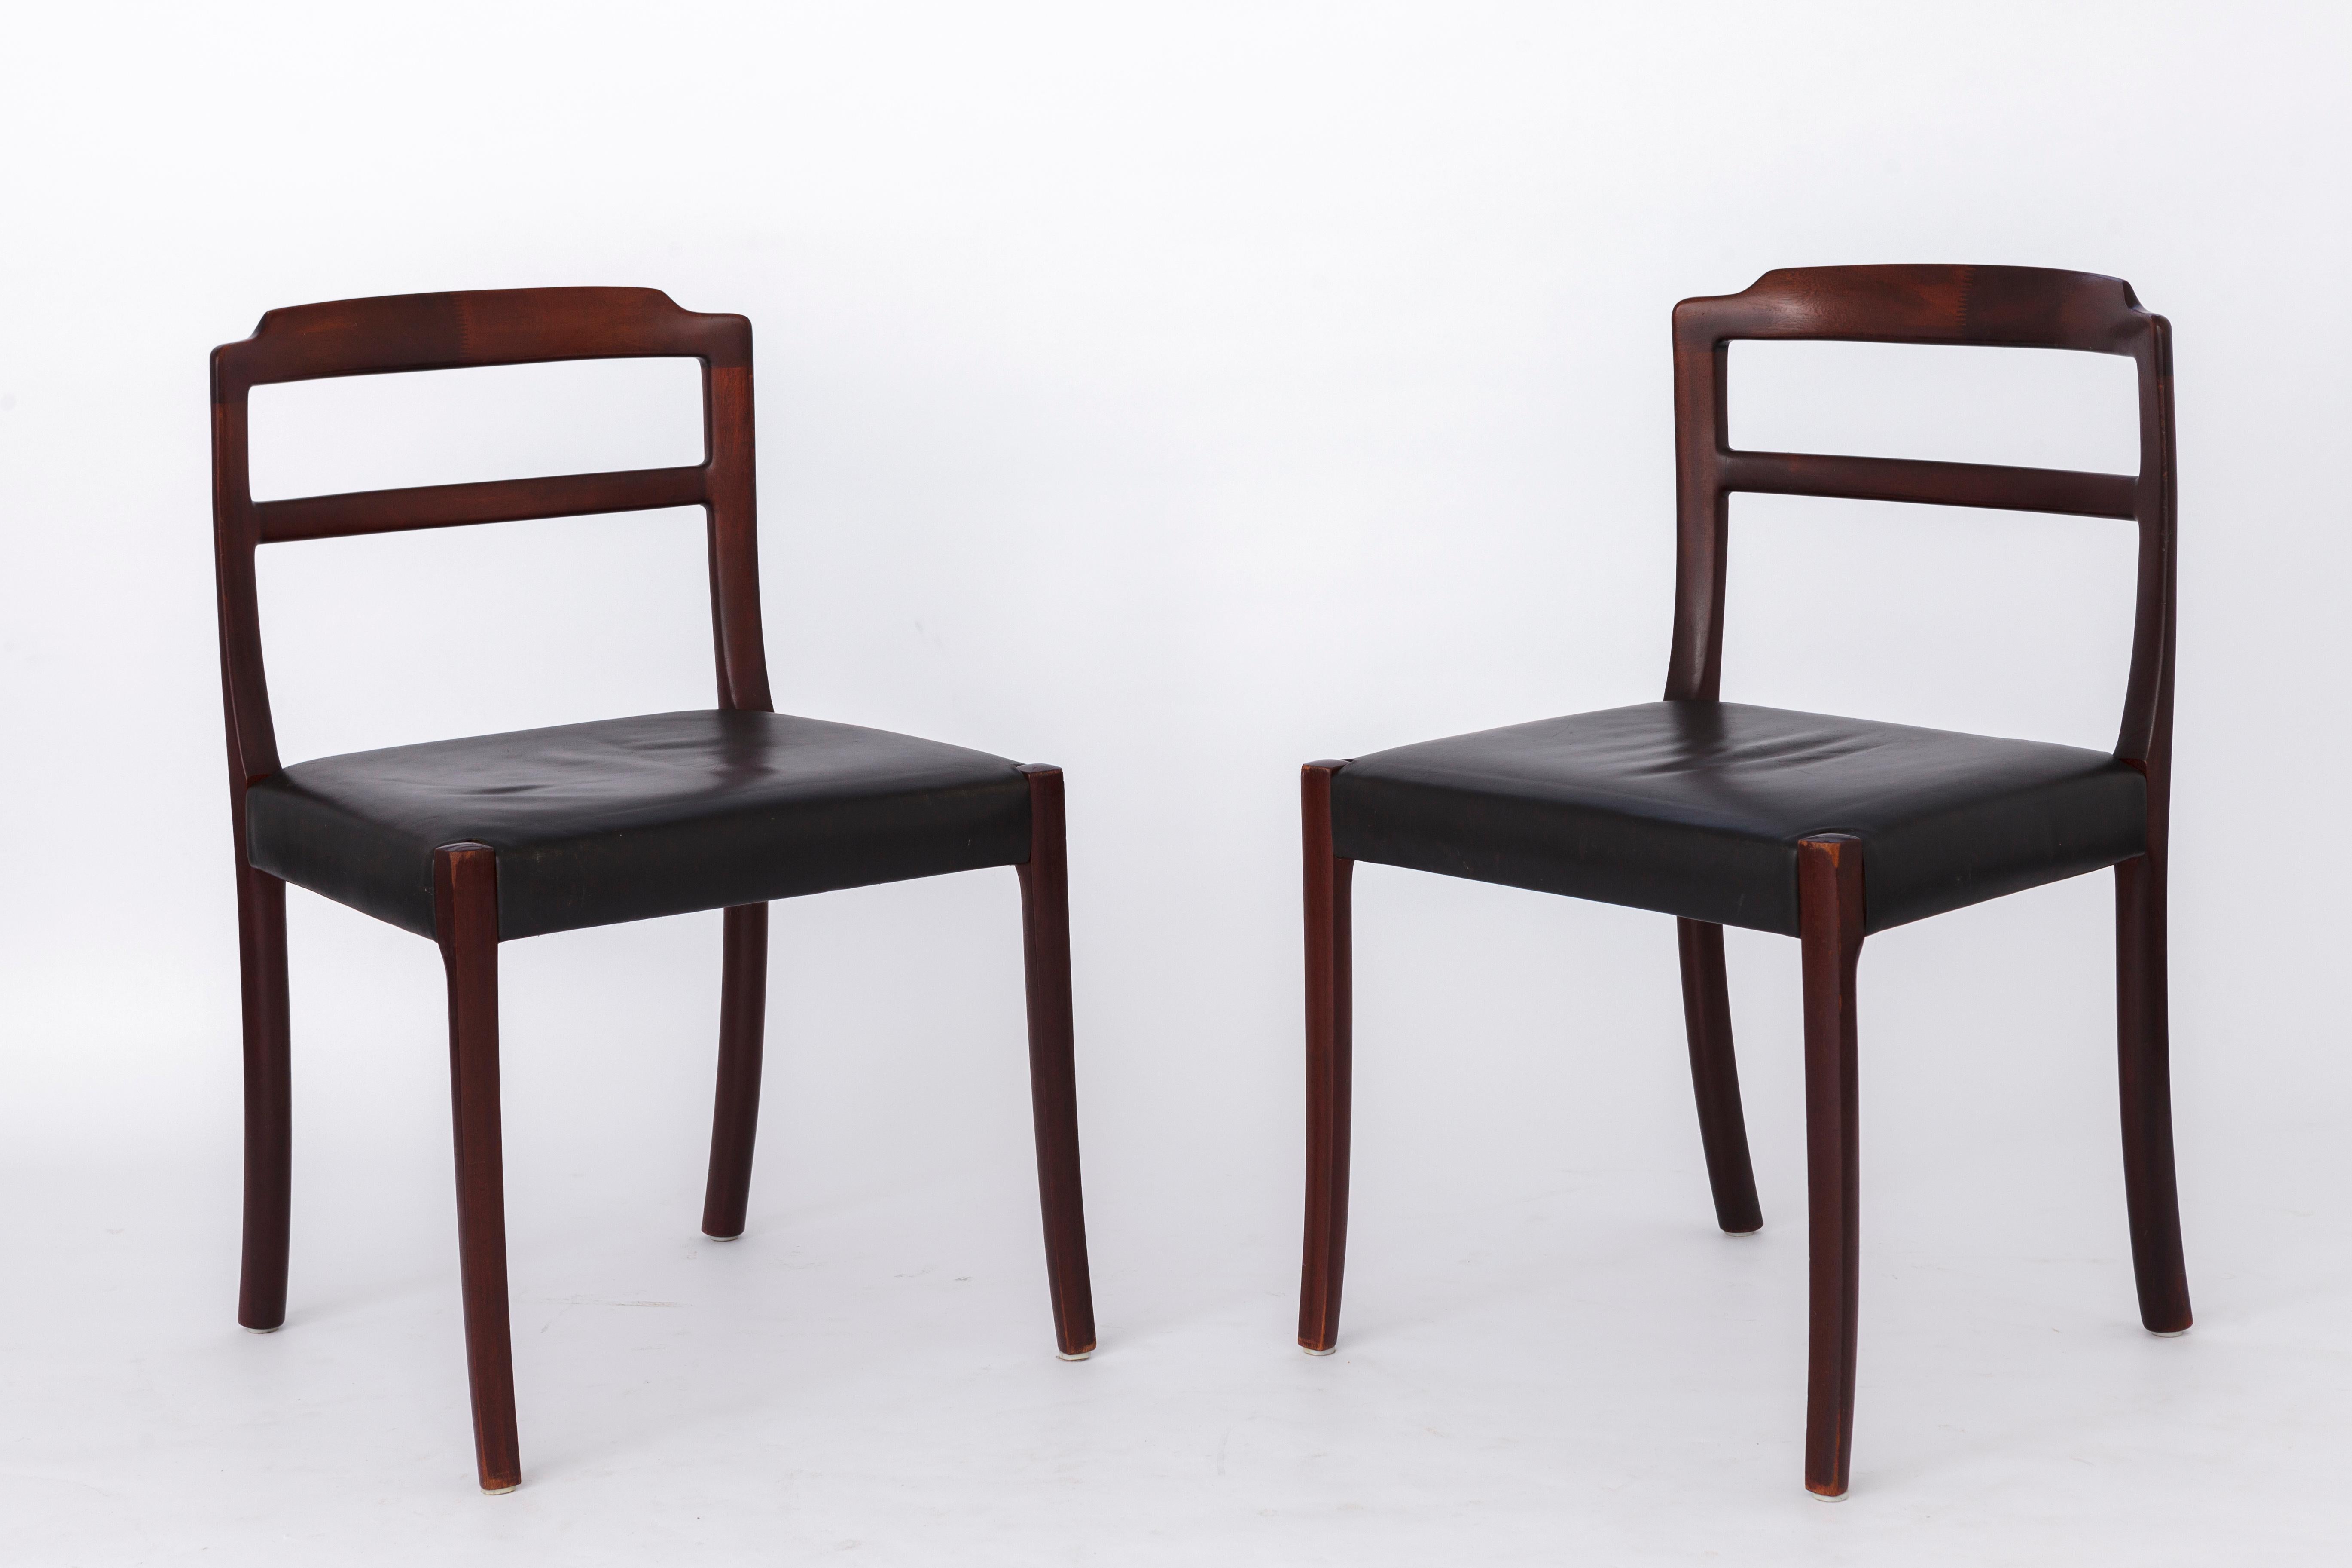 Mid-Century Modern 4 Vintage Chairs by Ole Wanscher, 1960s, Rosewood & Leather, Denmark For Sale